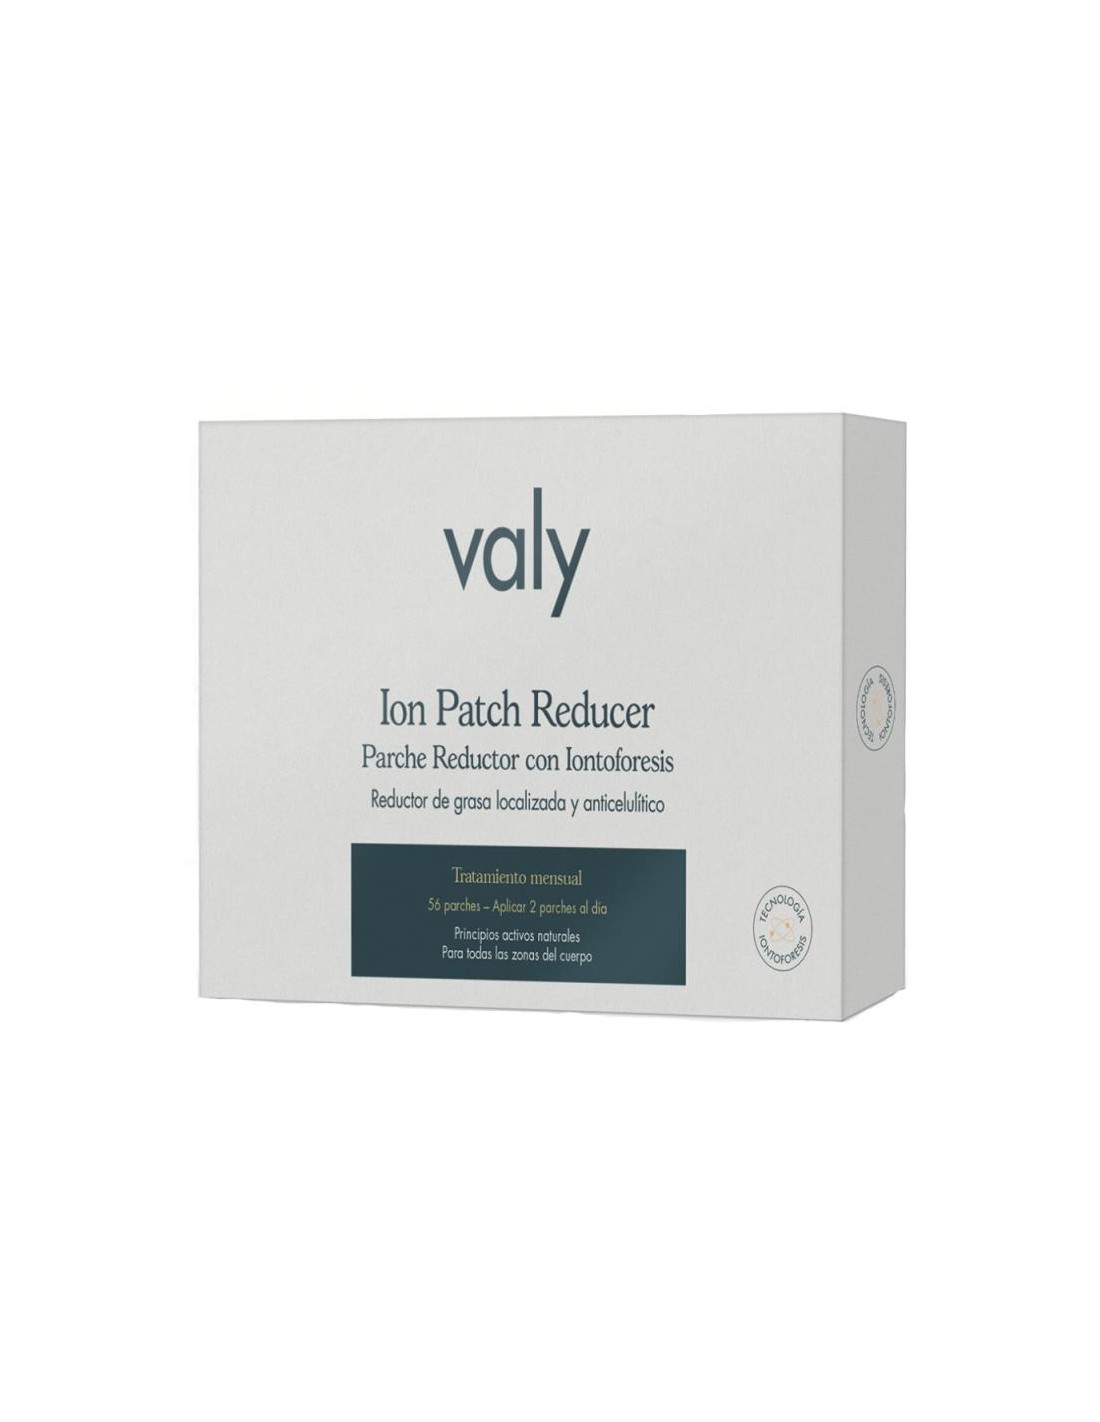 Compra Valy Ion Patch Reducer Parche Reductor farma10